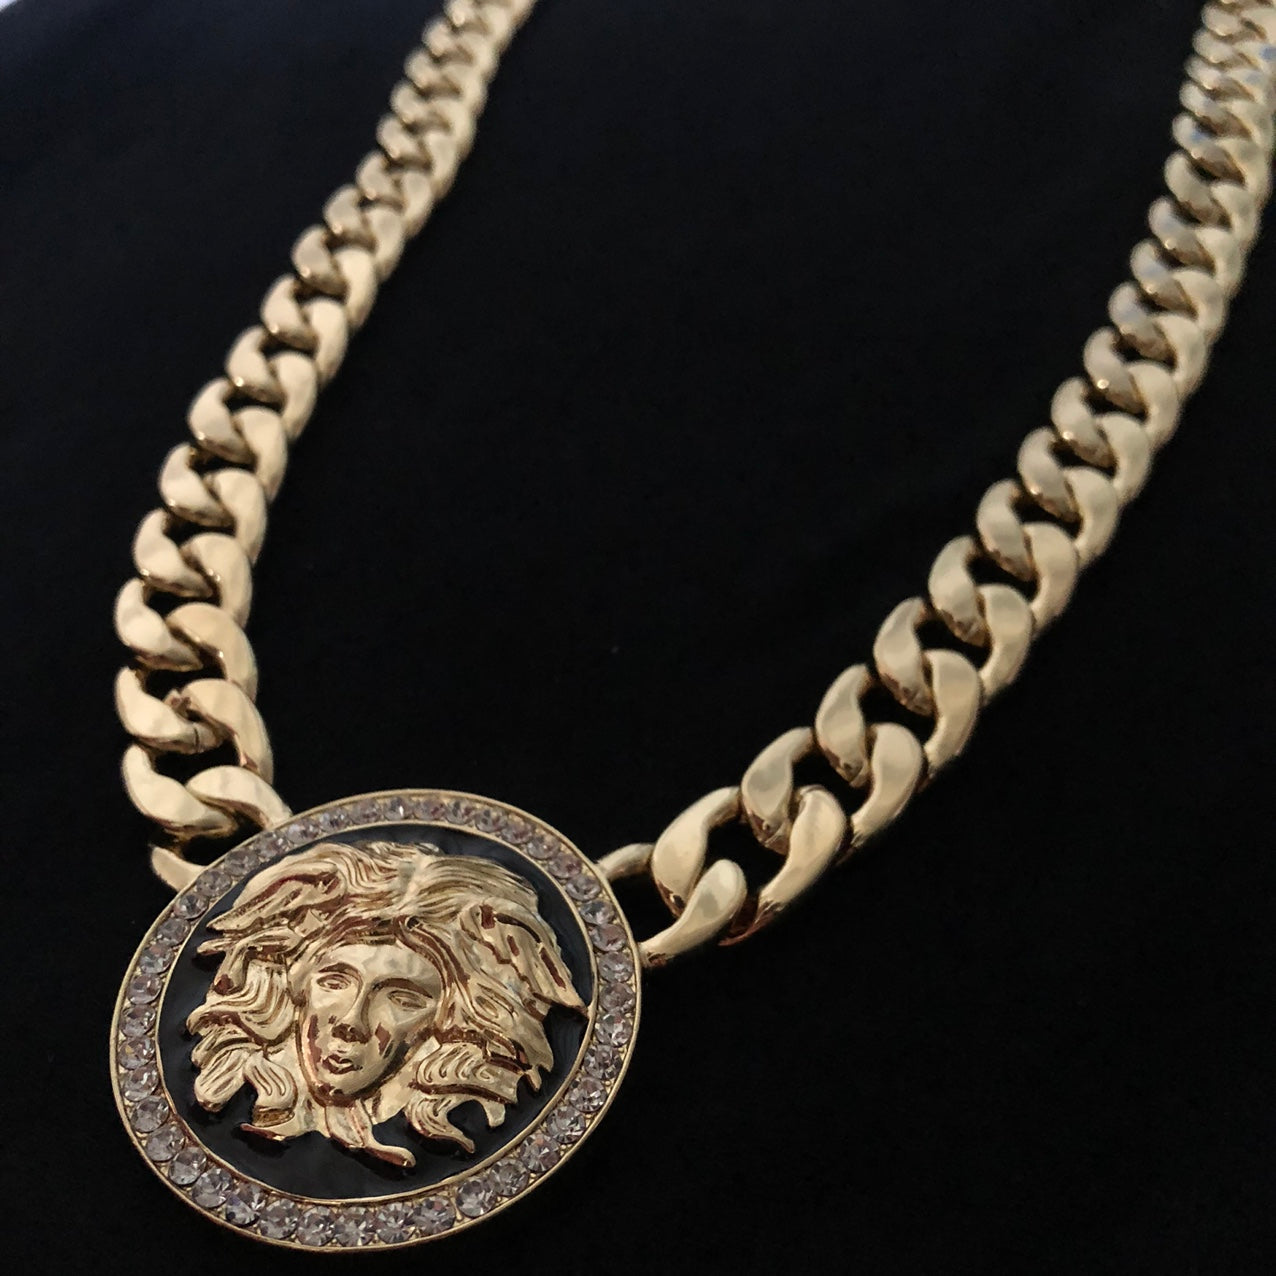 Luxury Iced Out Gold Medusa Pendant - Sitting On Heavy 16mm Gold Cuban Chain